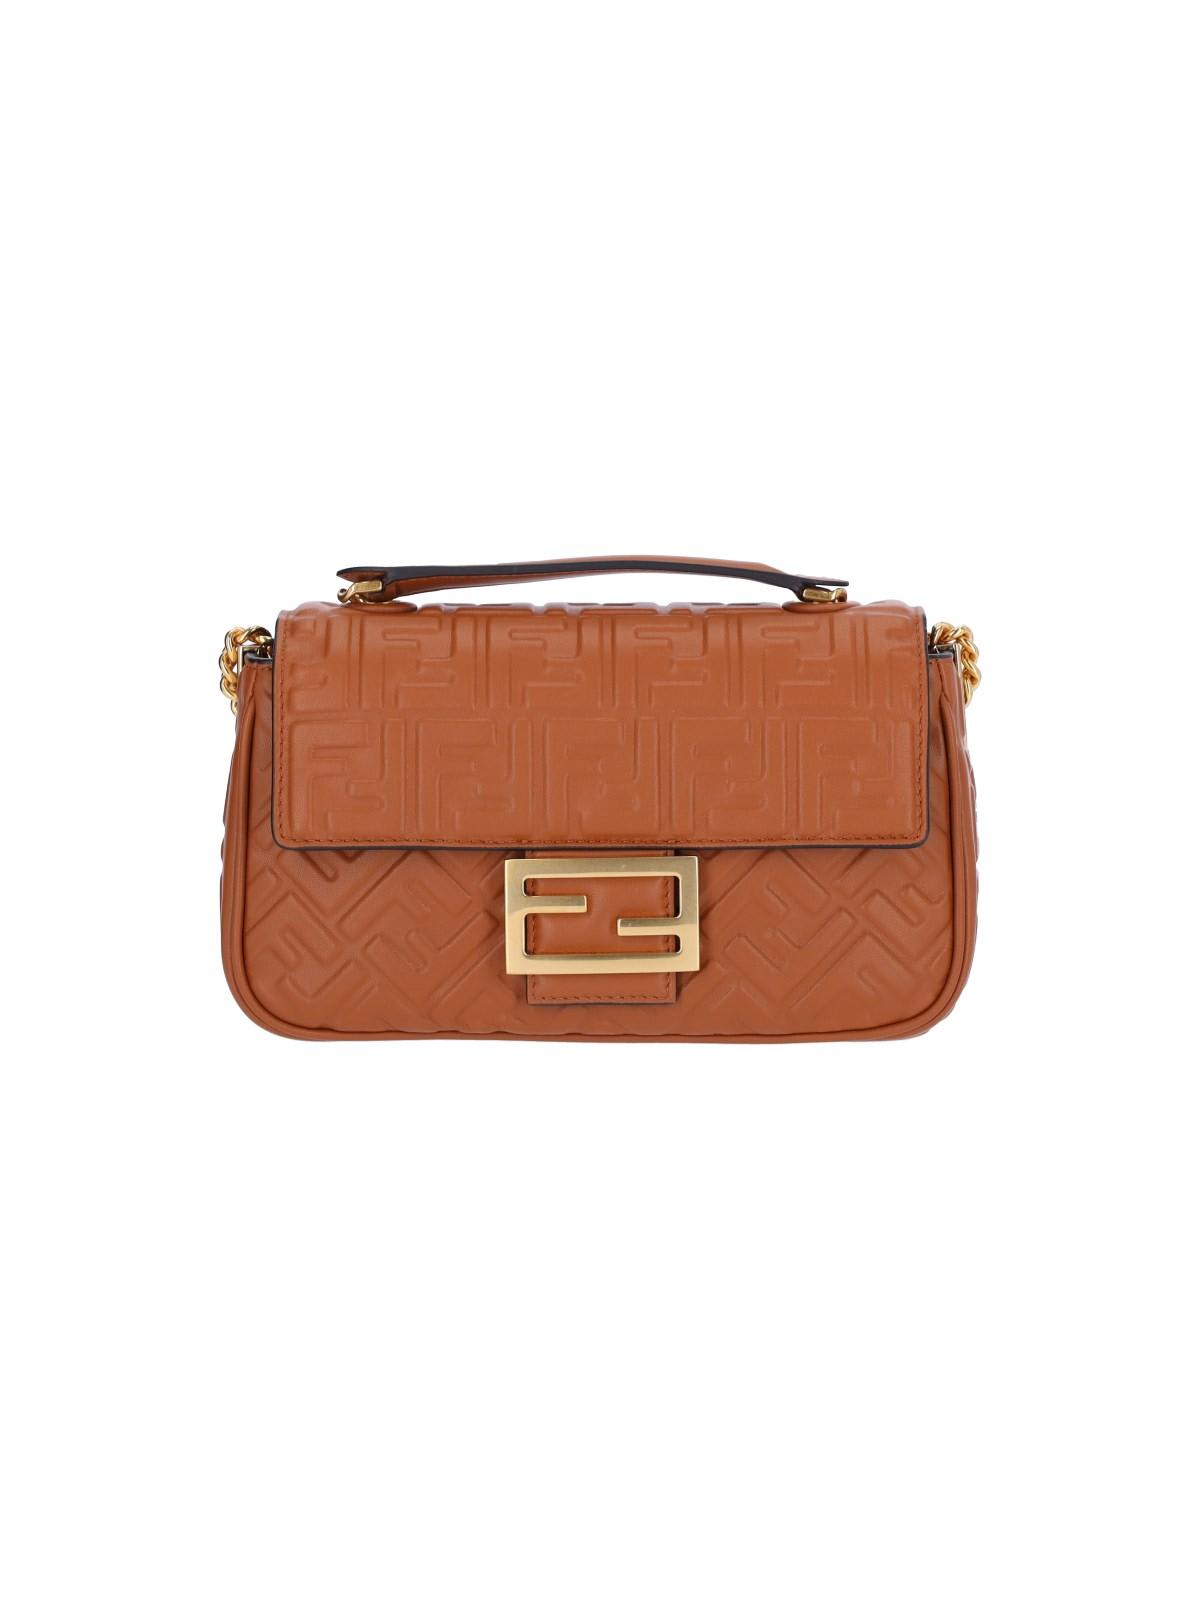 FENDI: Baguette Chain Midi bag in leather with embossed FF